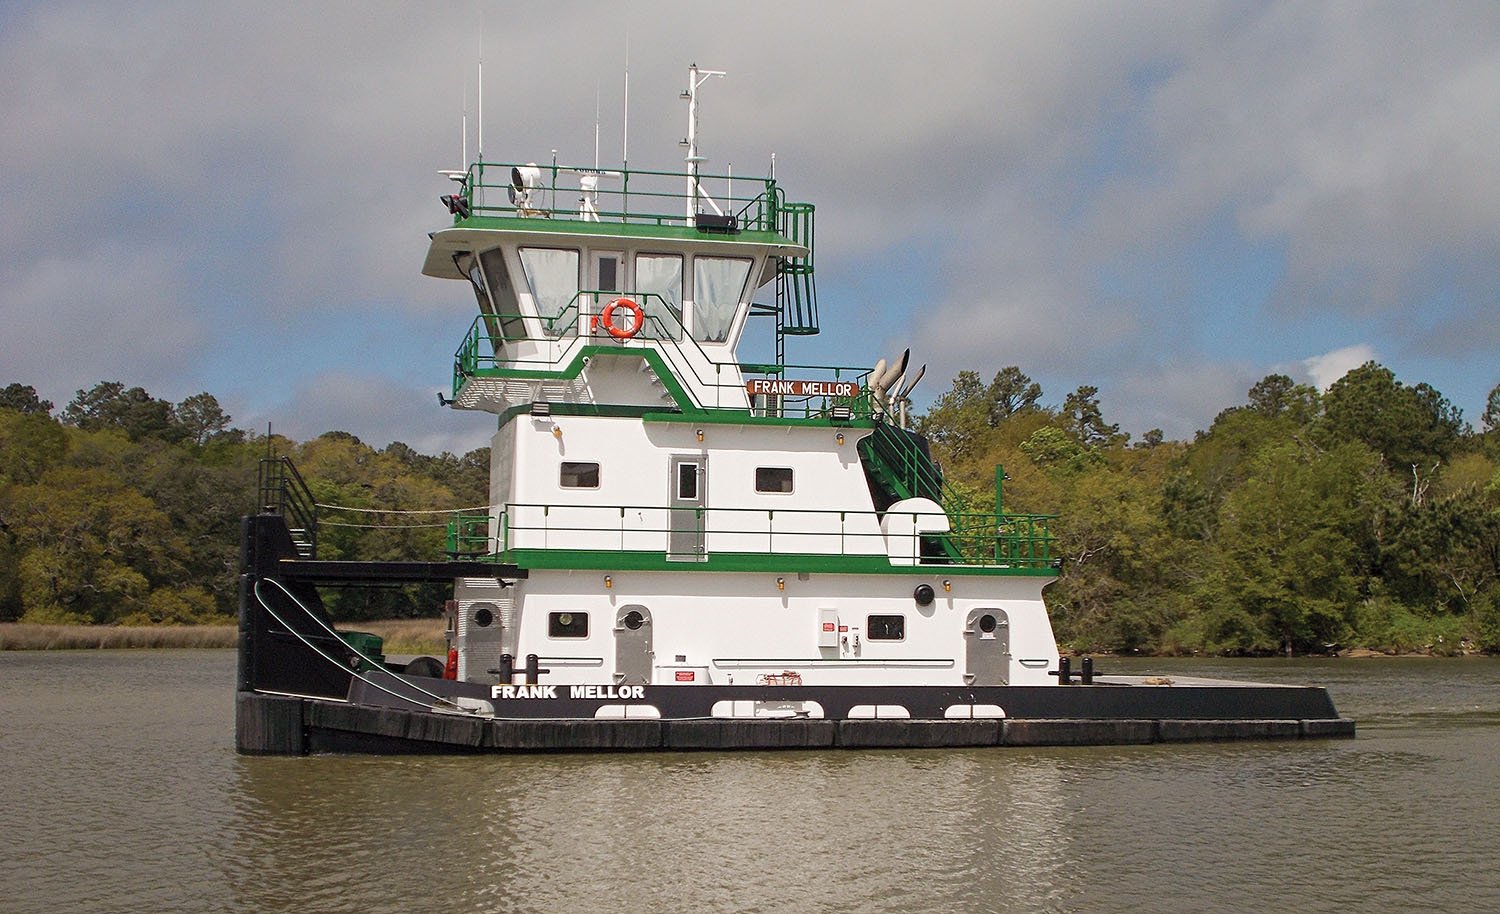 frank mellor towboat on the water